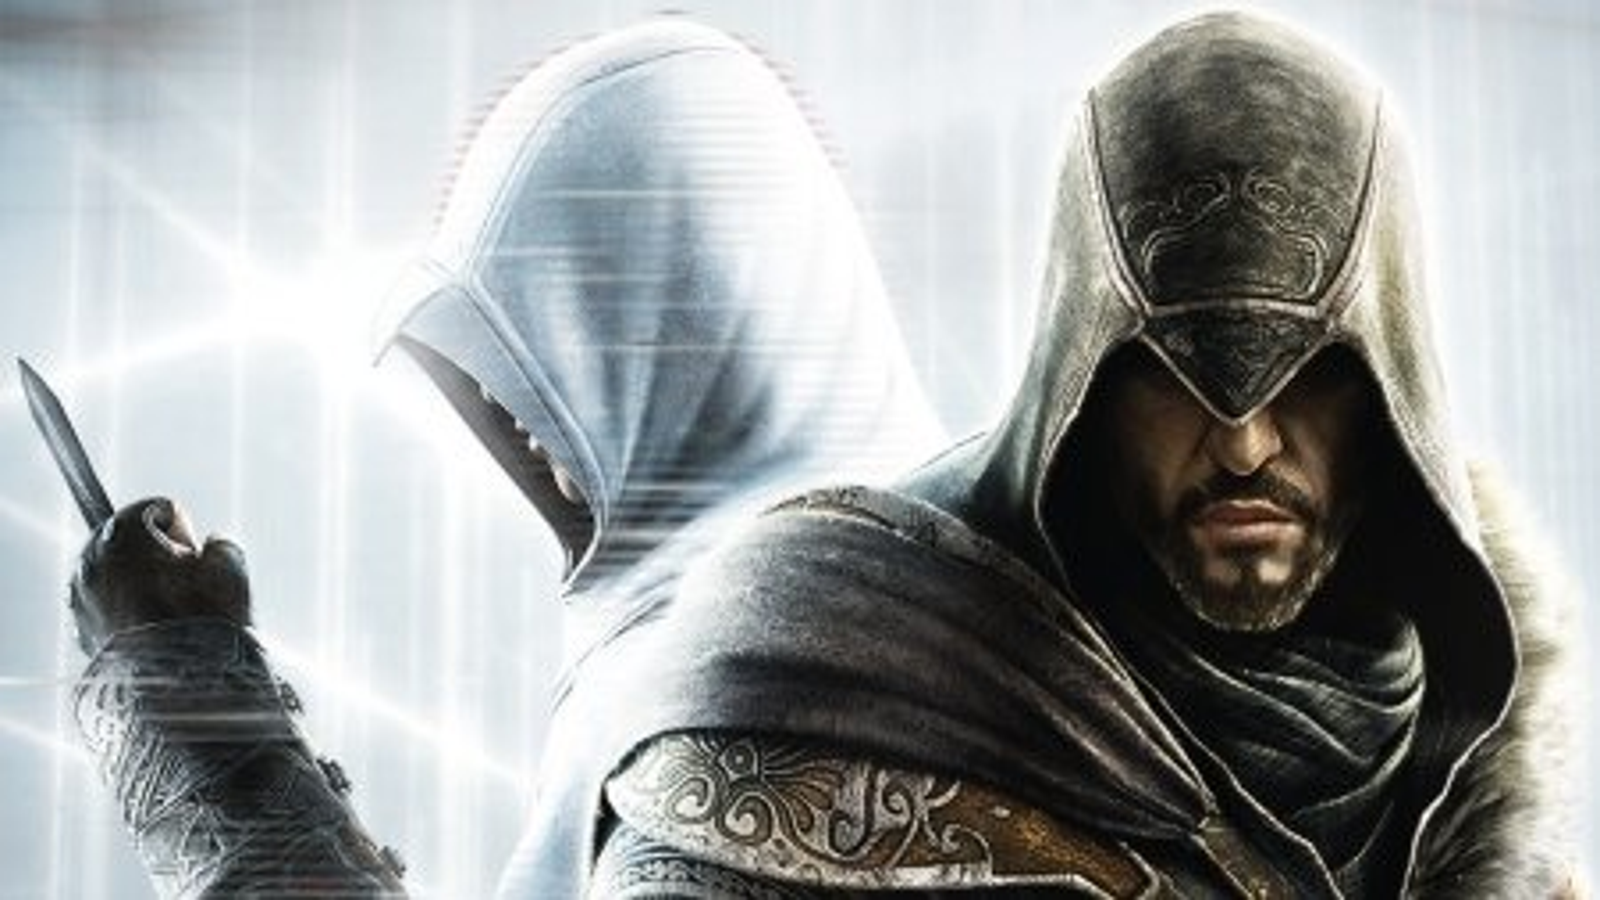 How Long Does It Take To Finish Assassin's Creed Revelations?